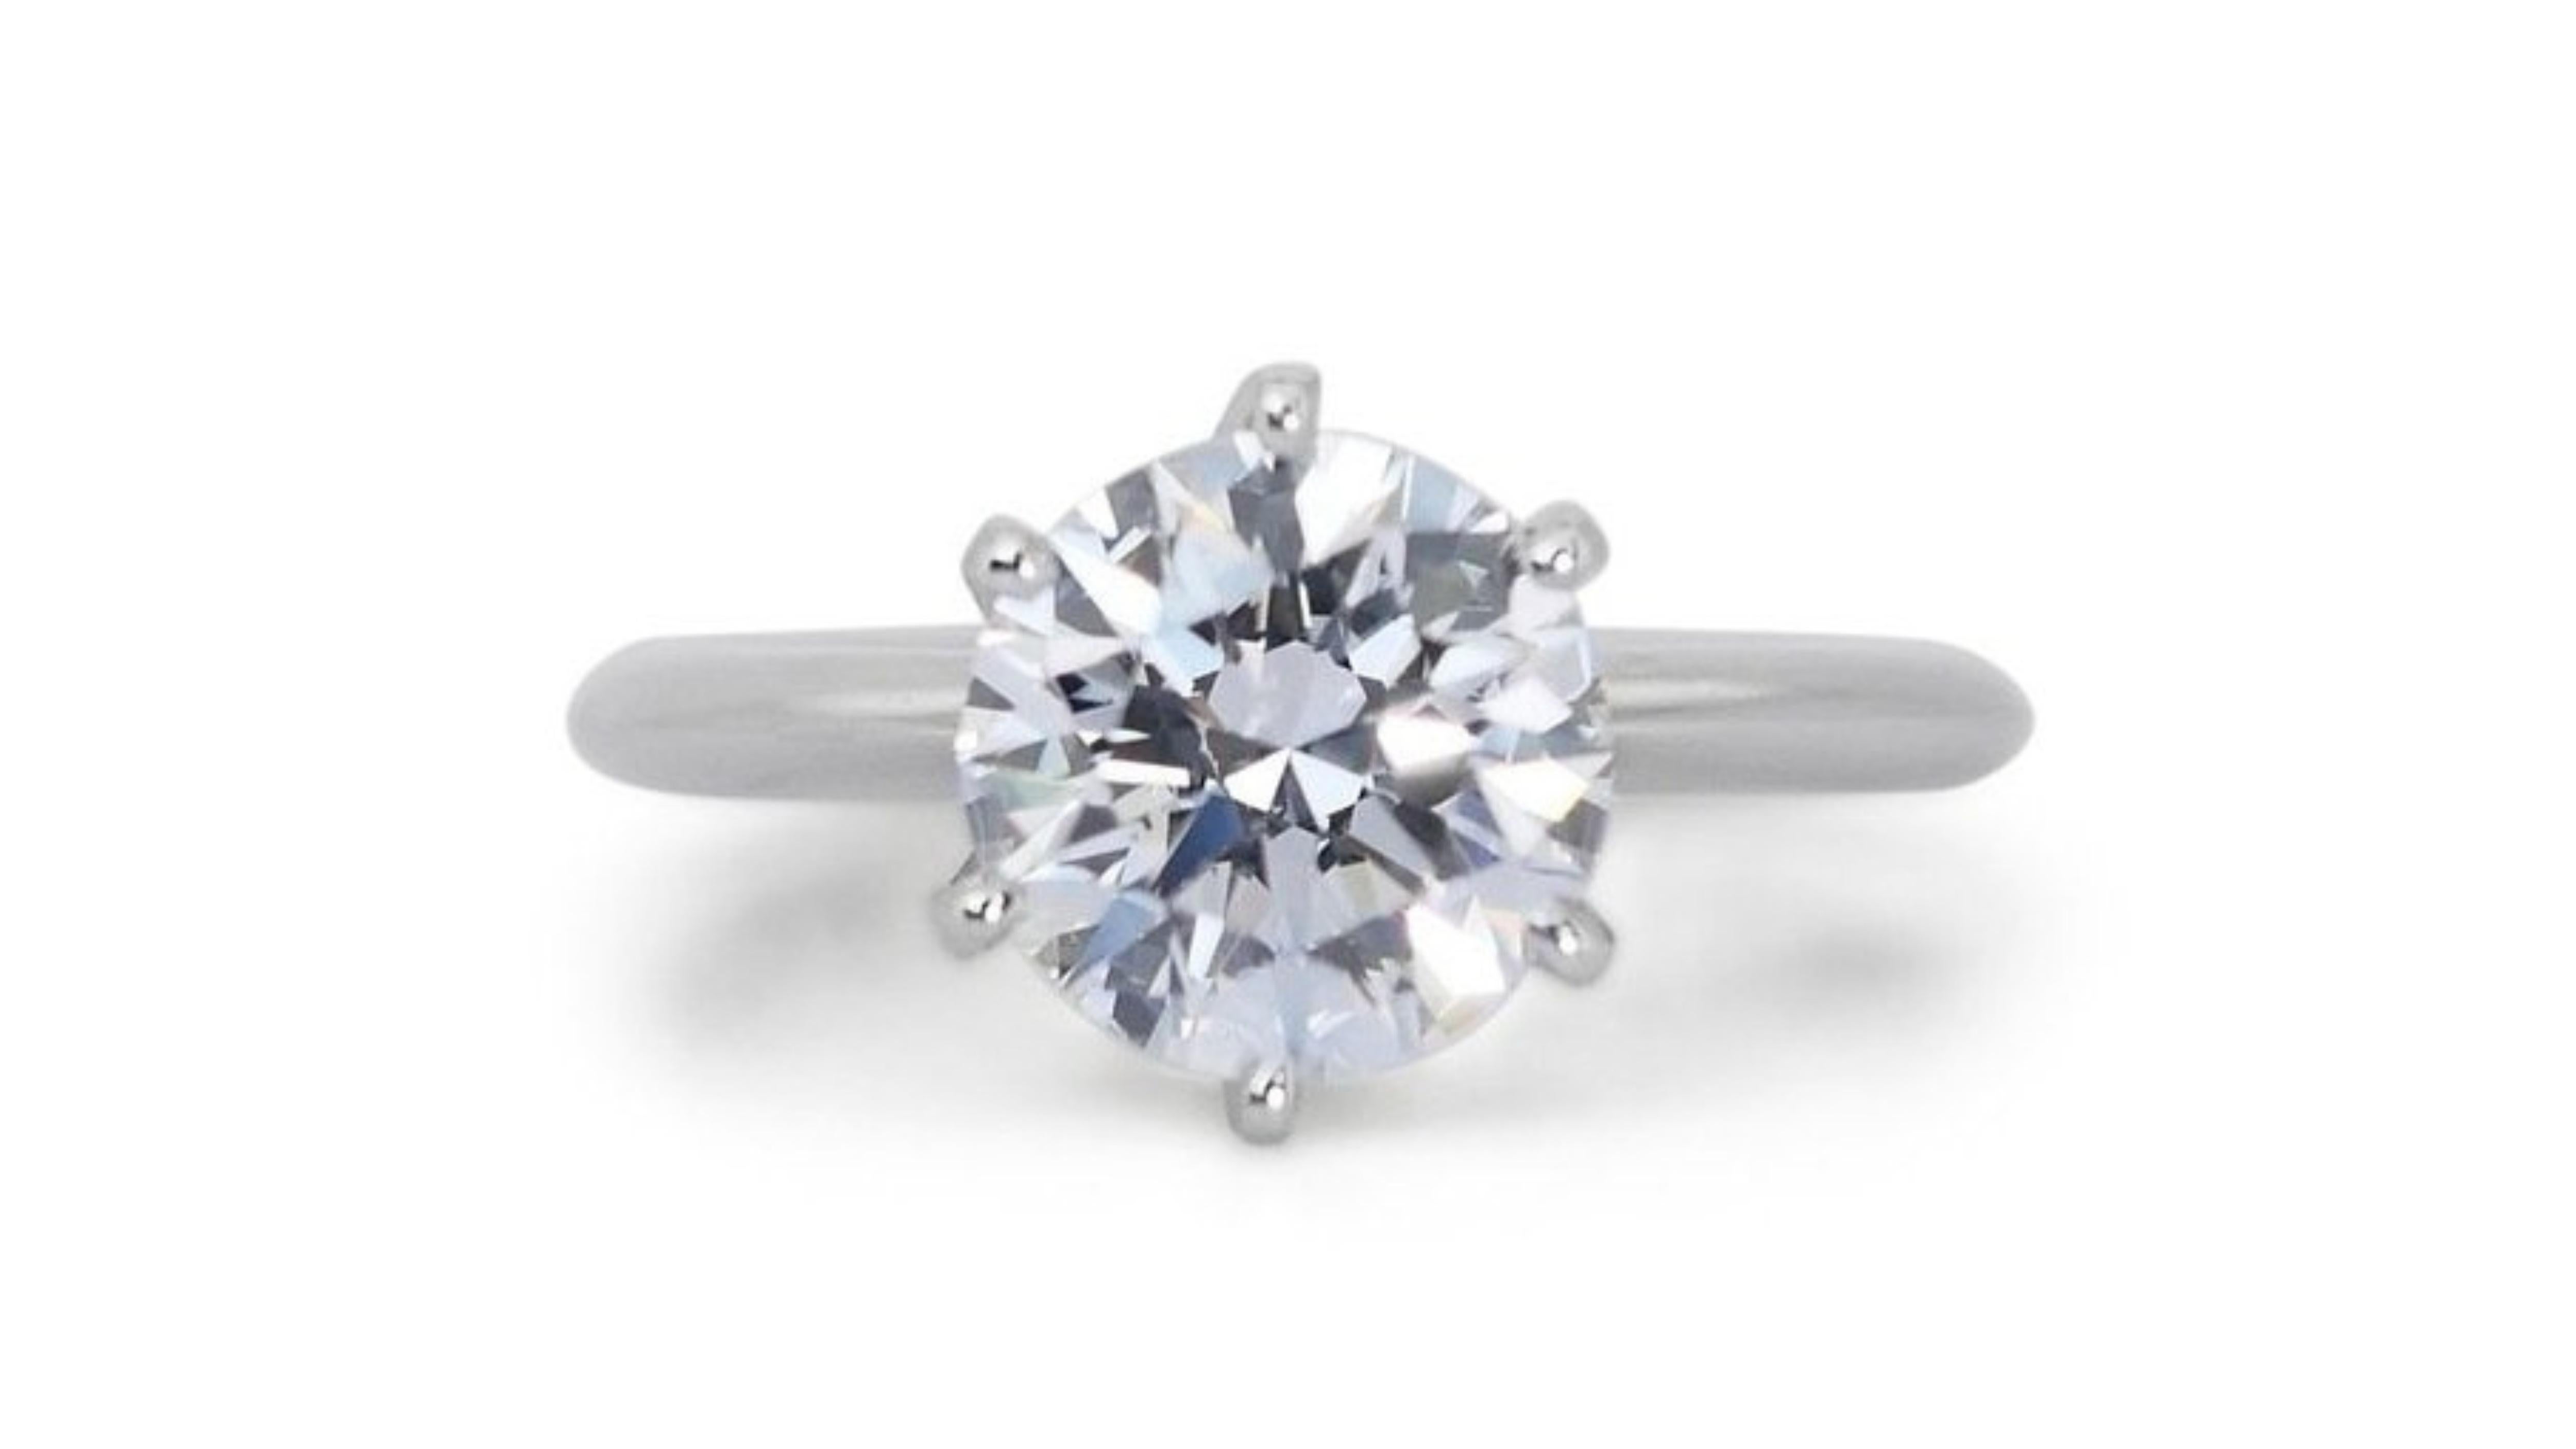 This exquisite solitaire ring showcases a dazzling 2.15 carat round brilliant diamond. The diamond is F color and VS2 clarity, with an excellent cut grade, ensuring maximum brilliance and sparkle. The setting is made of platinum, a durable and